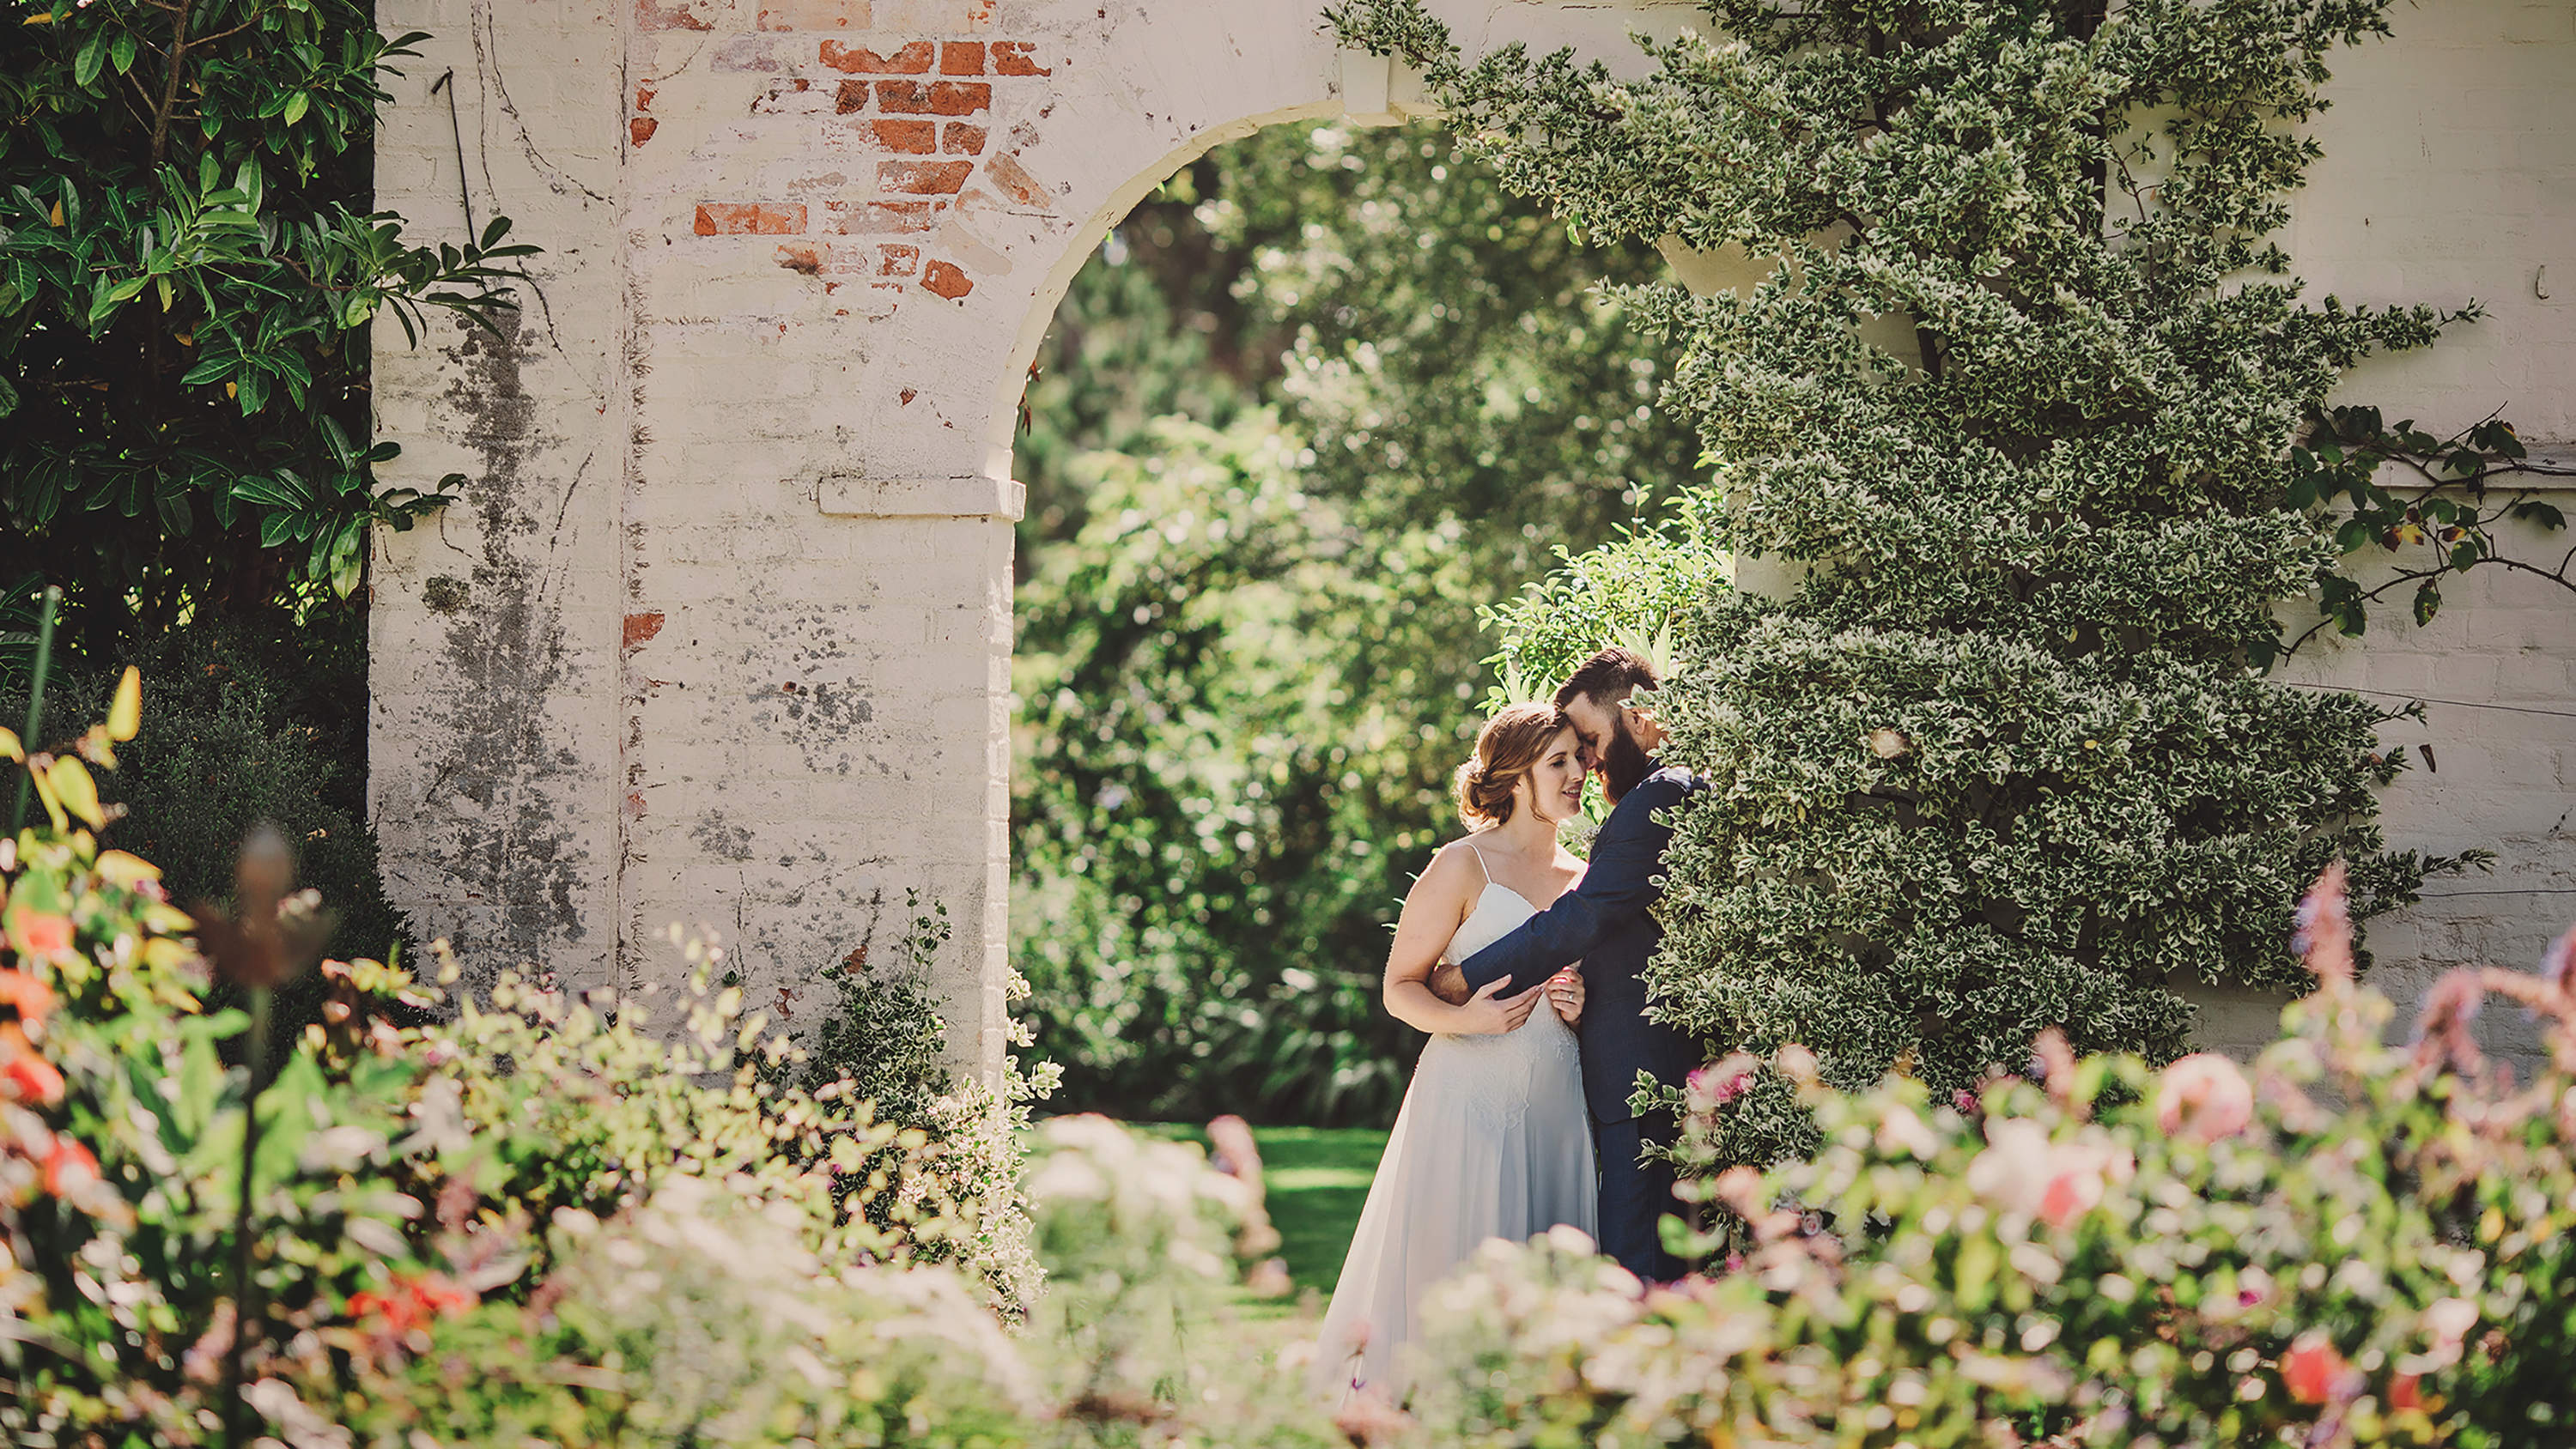 A bride and groom embrace under a white brick archway surrounded by climbing plants and flowers. Photo: Astrid Simone.